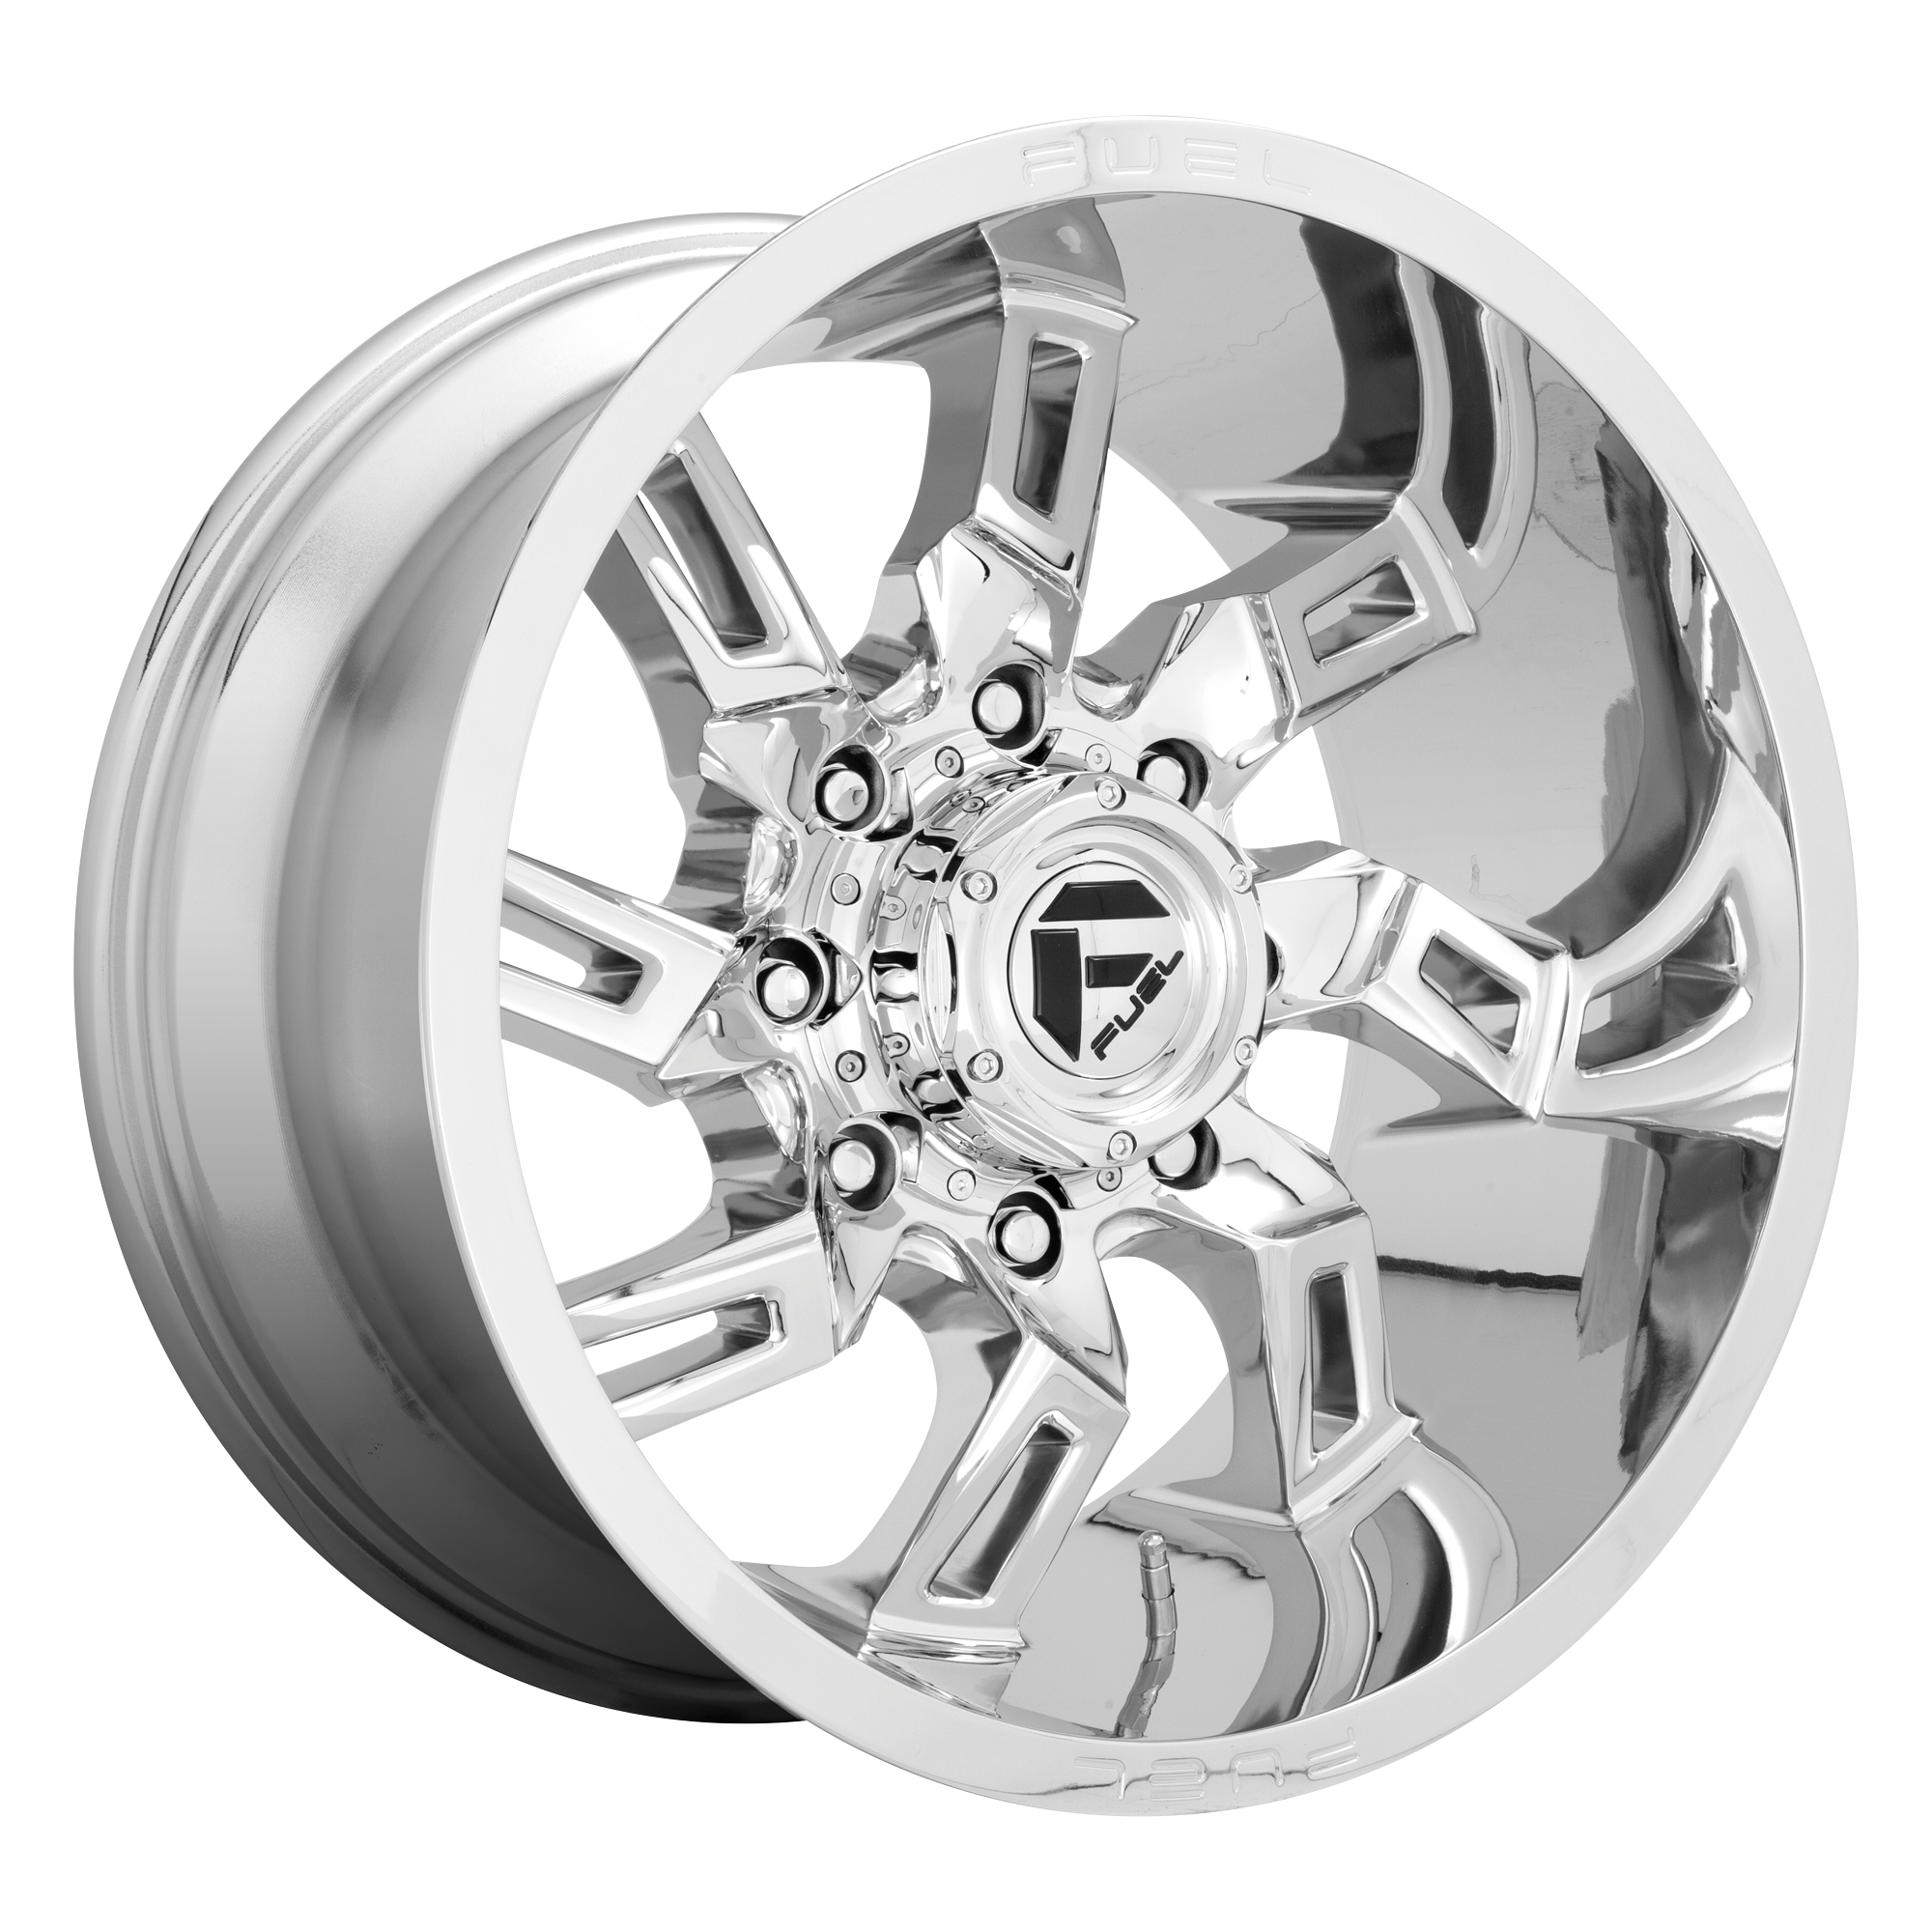 LOCKDOWN 20x9 8x170.00 CHROME (1 mm) - Tires and Engine Performance